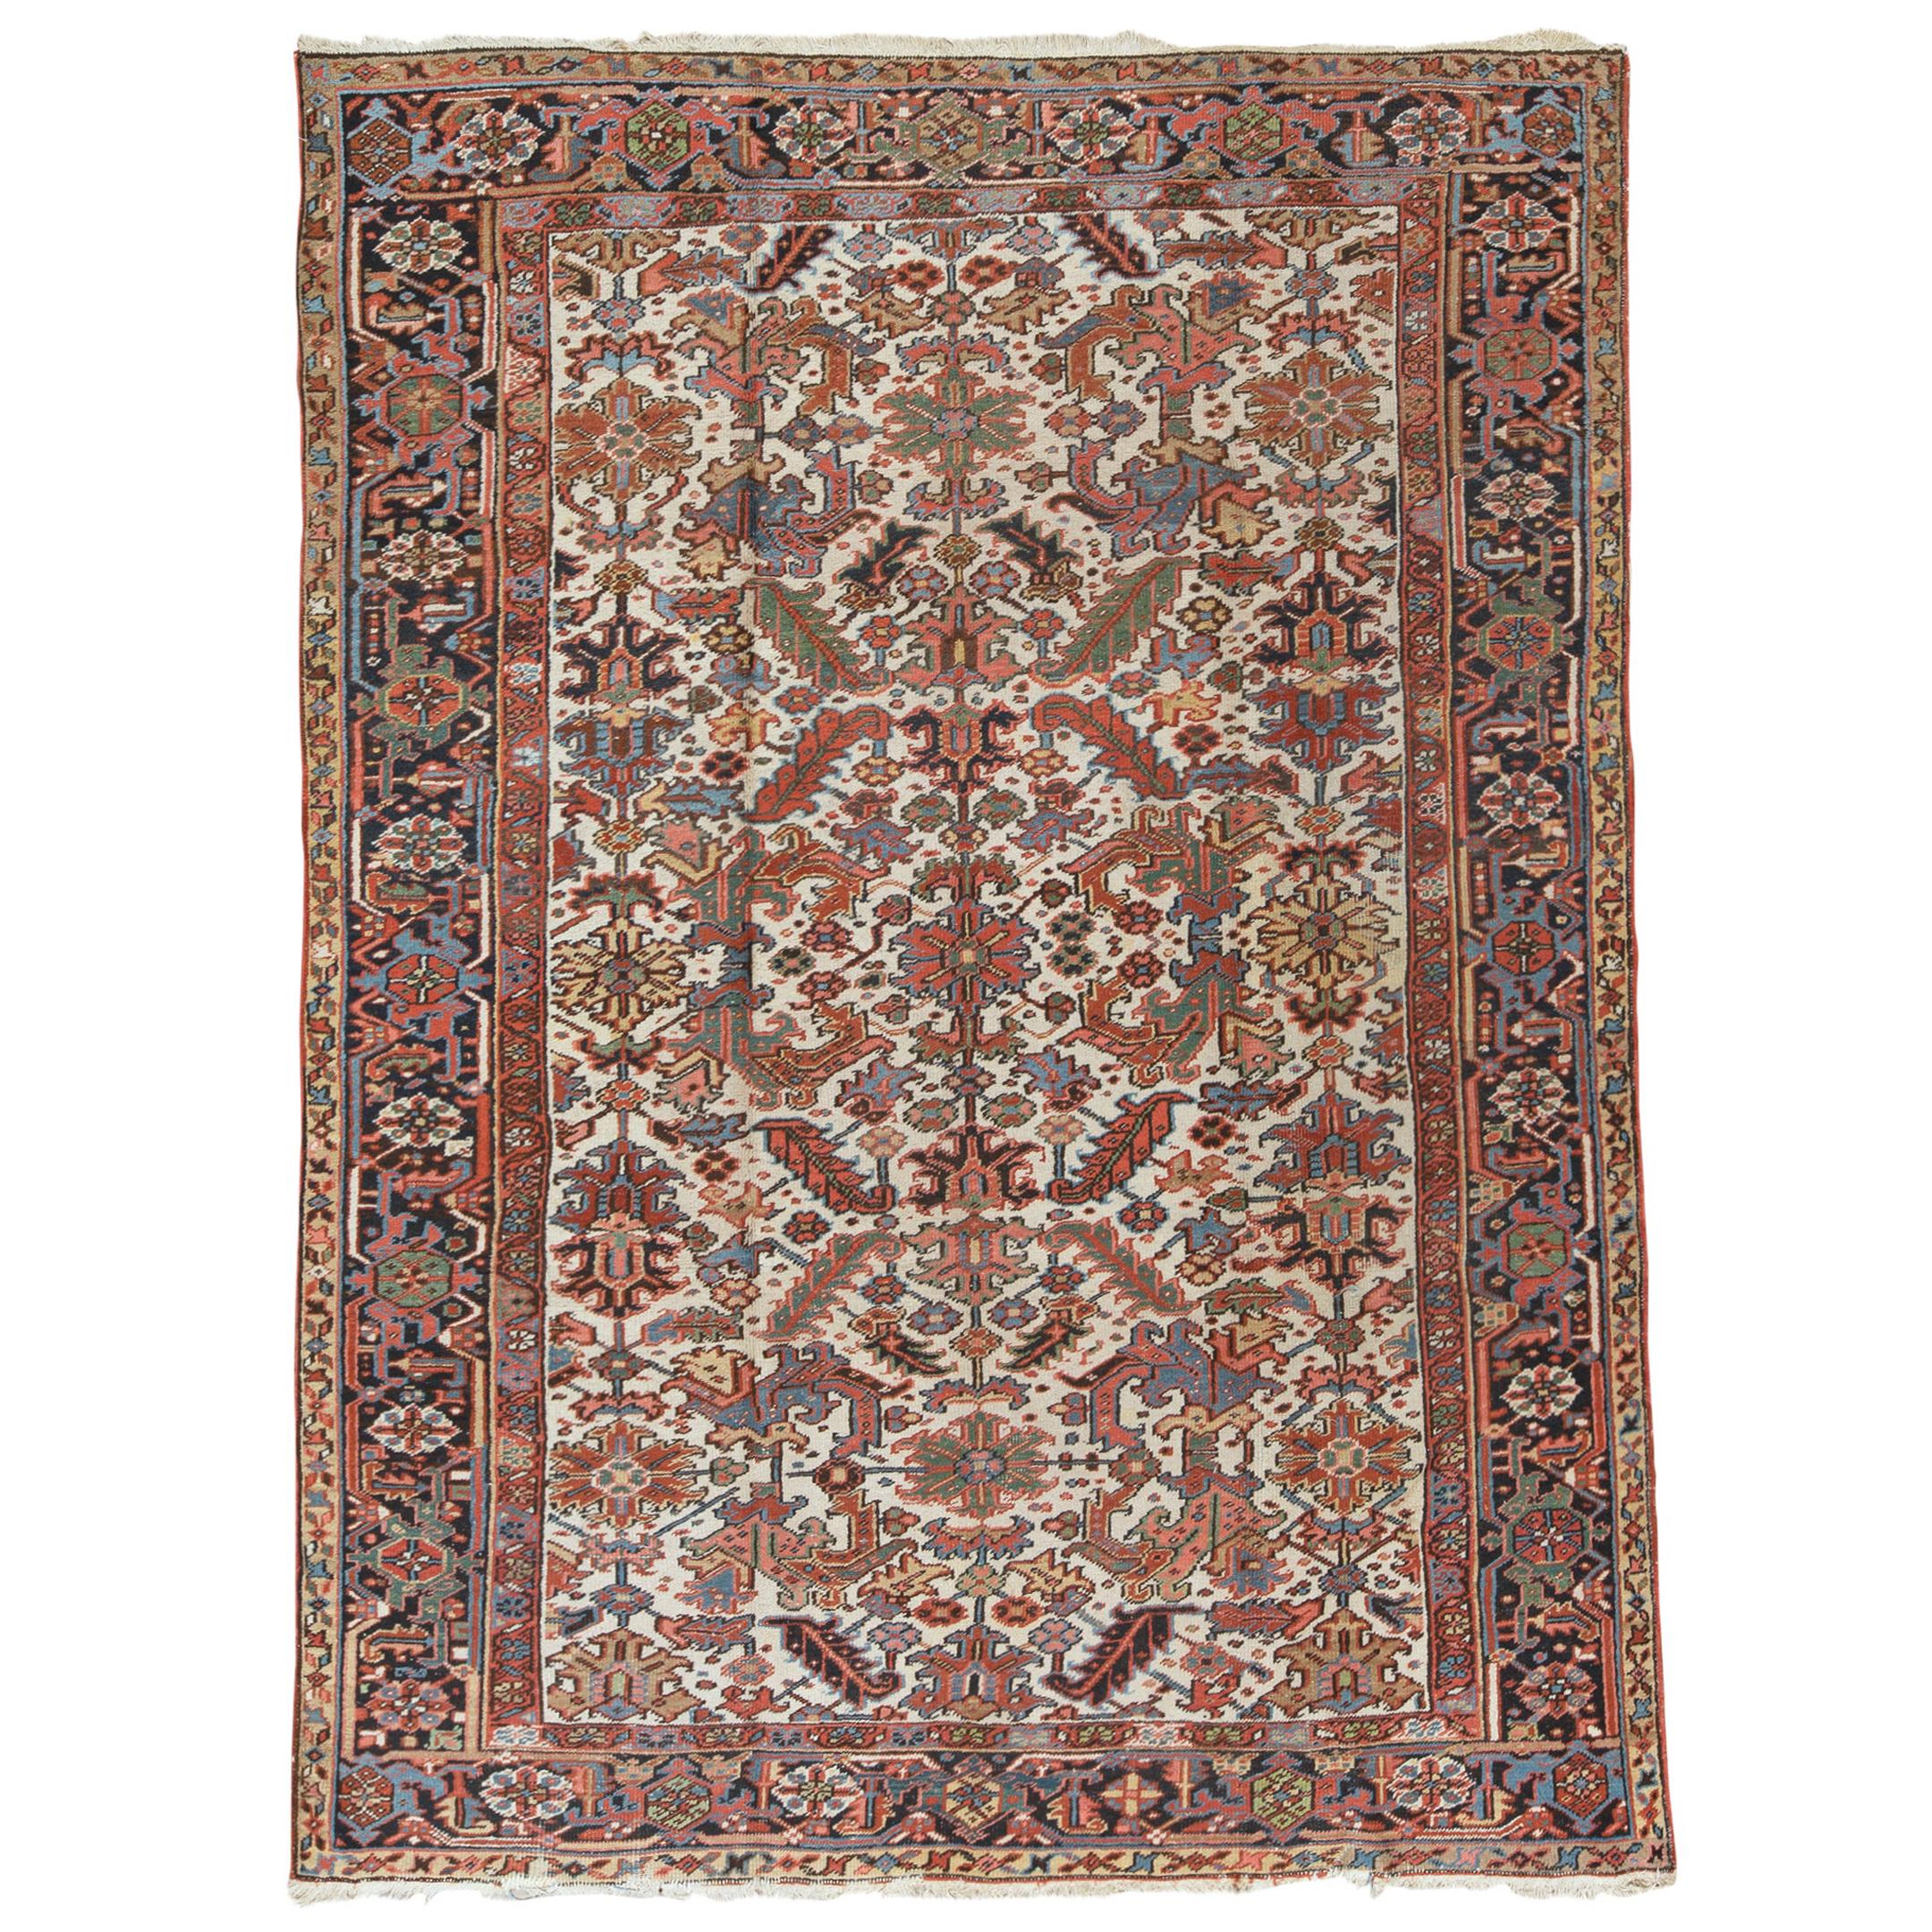   Antique Persian Fine Traditional Handwoven Luxury Wool Ivory / Blue Rug